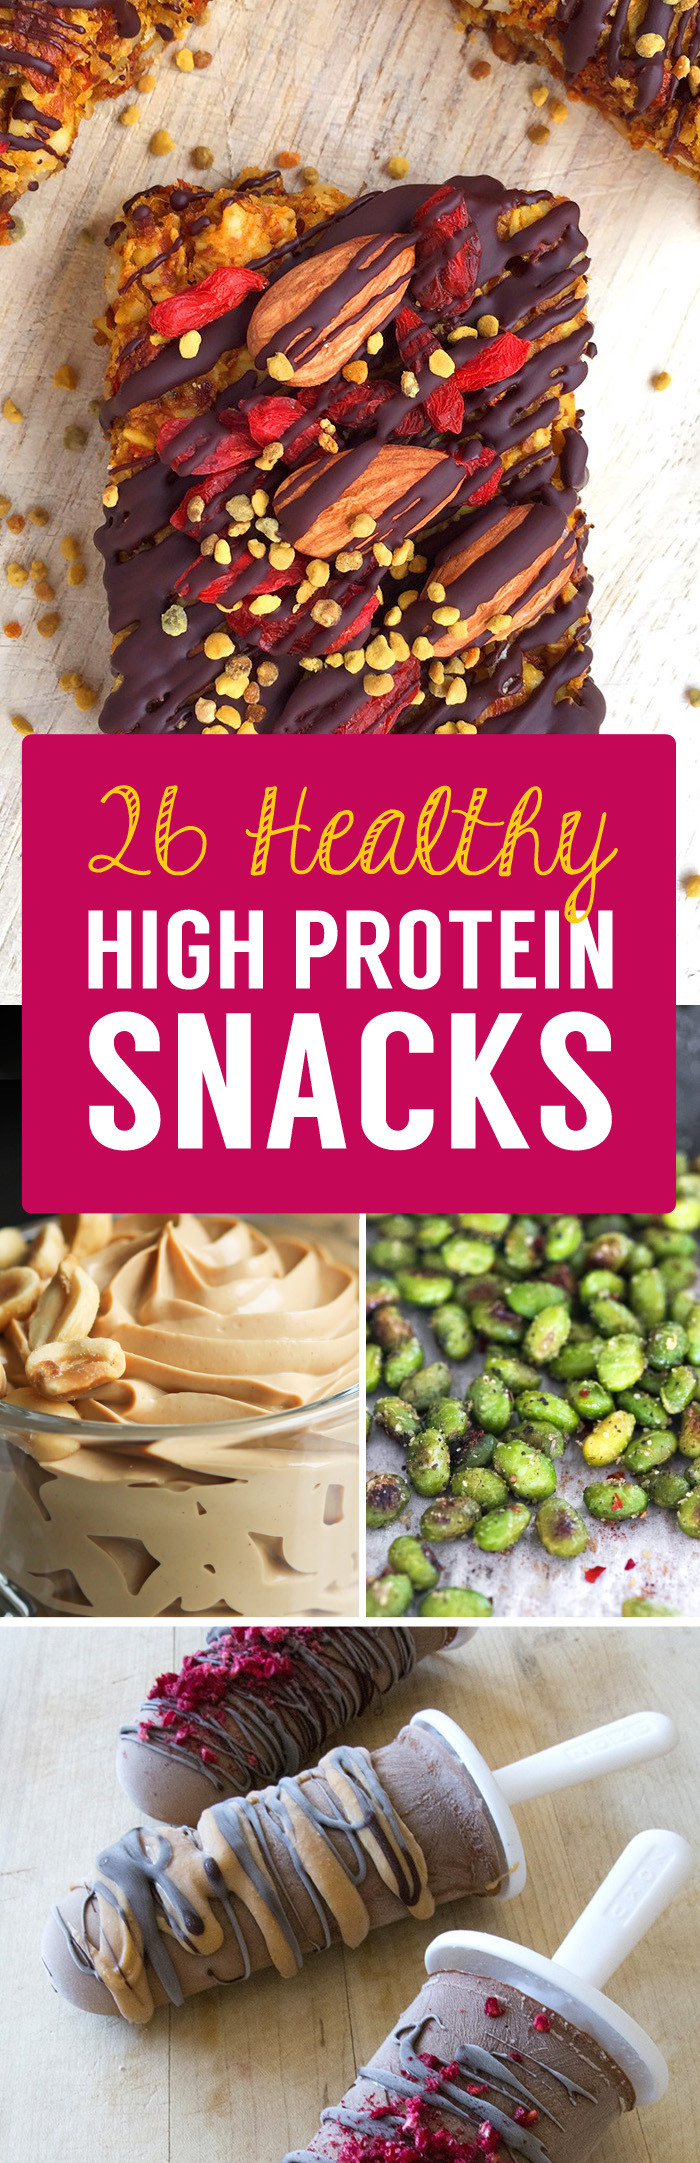 Healthy Snacks High In Protein
 26 High Protein Snacks That Will Help You Lose Fat & Feel